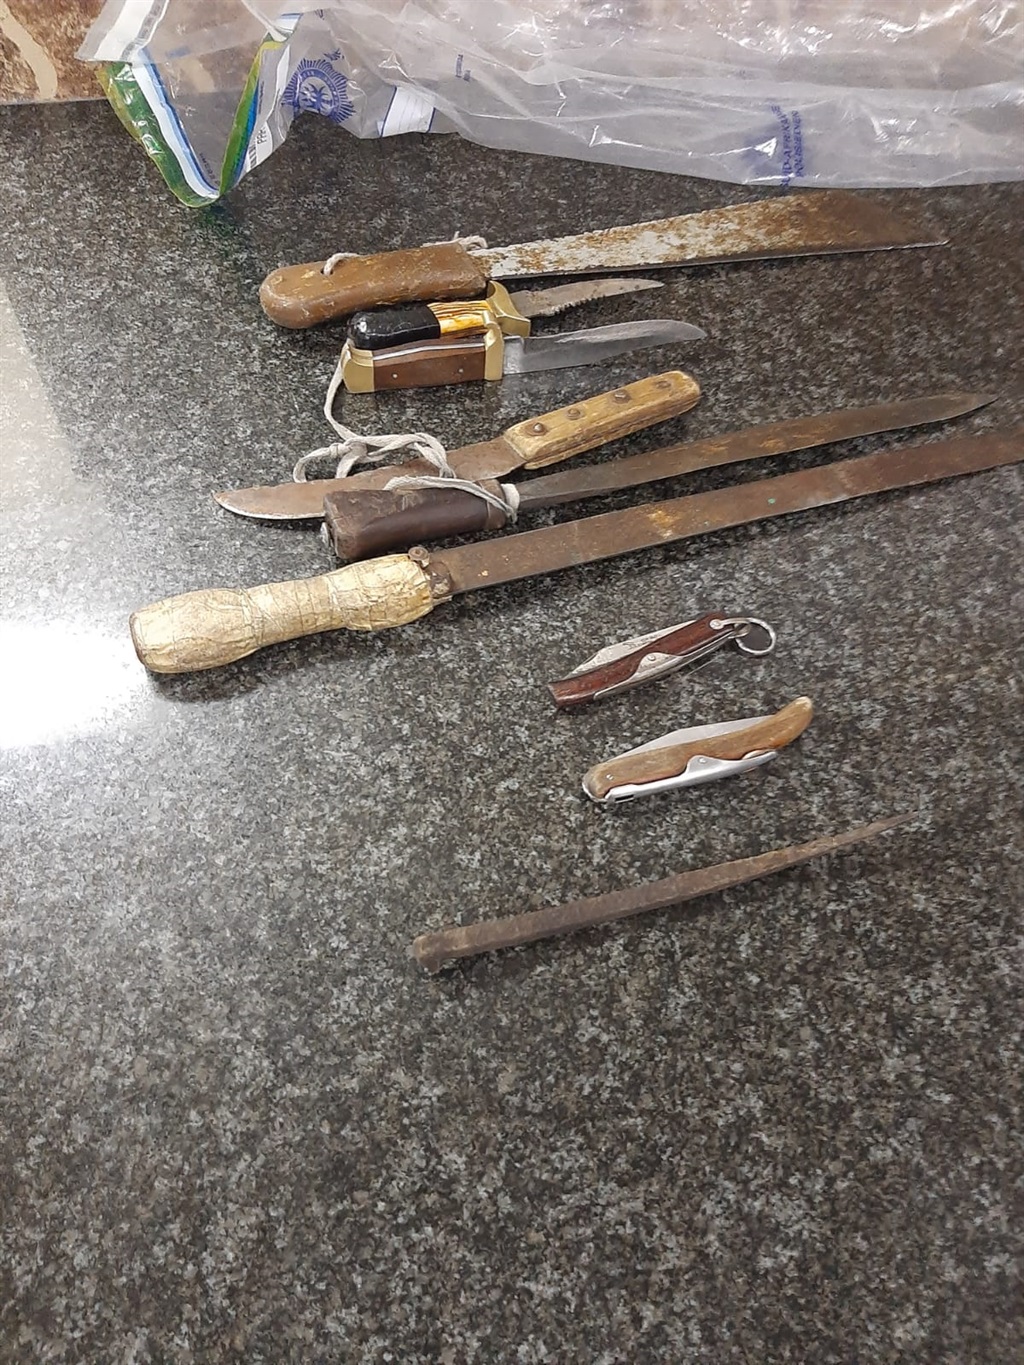 Some of the weapons police found on the gang